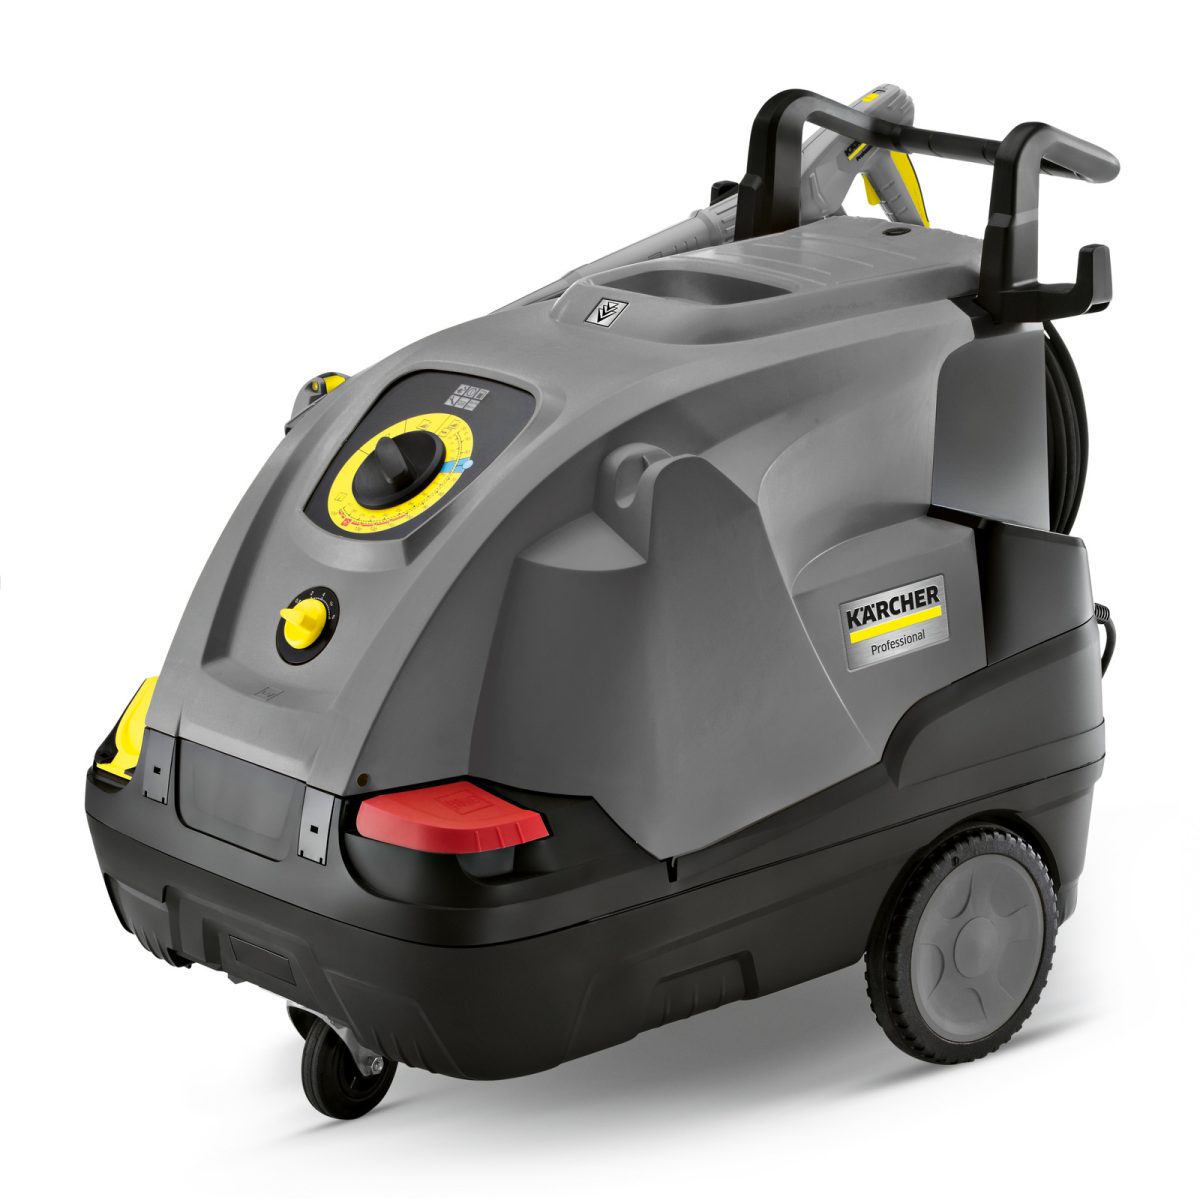 HDS 6/10 4C - Hot Water Pressure Washer